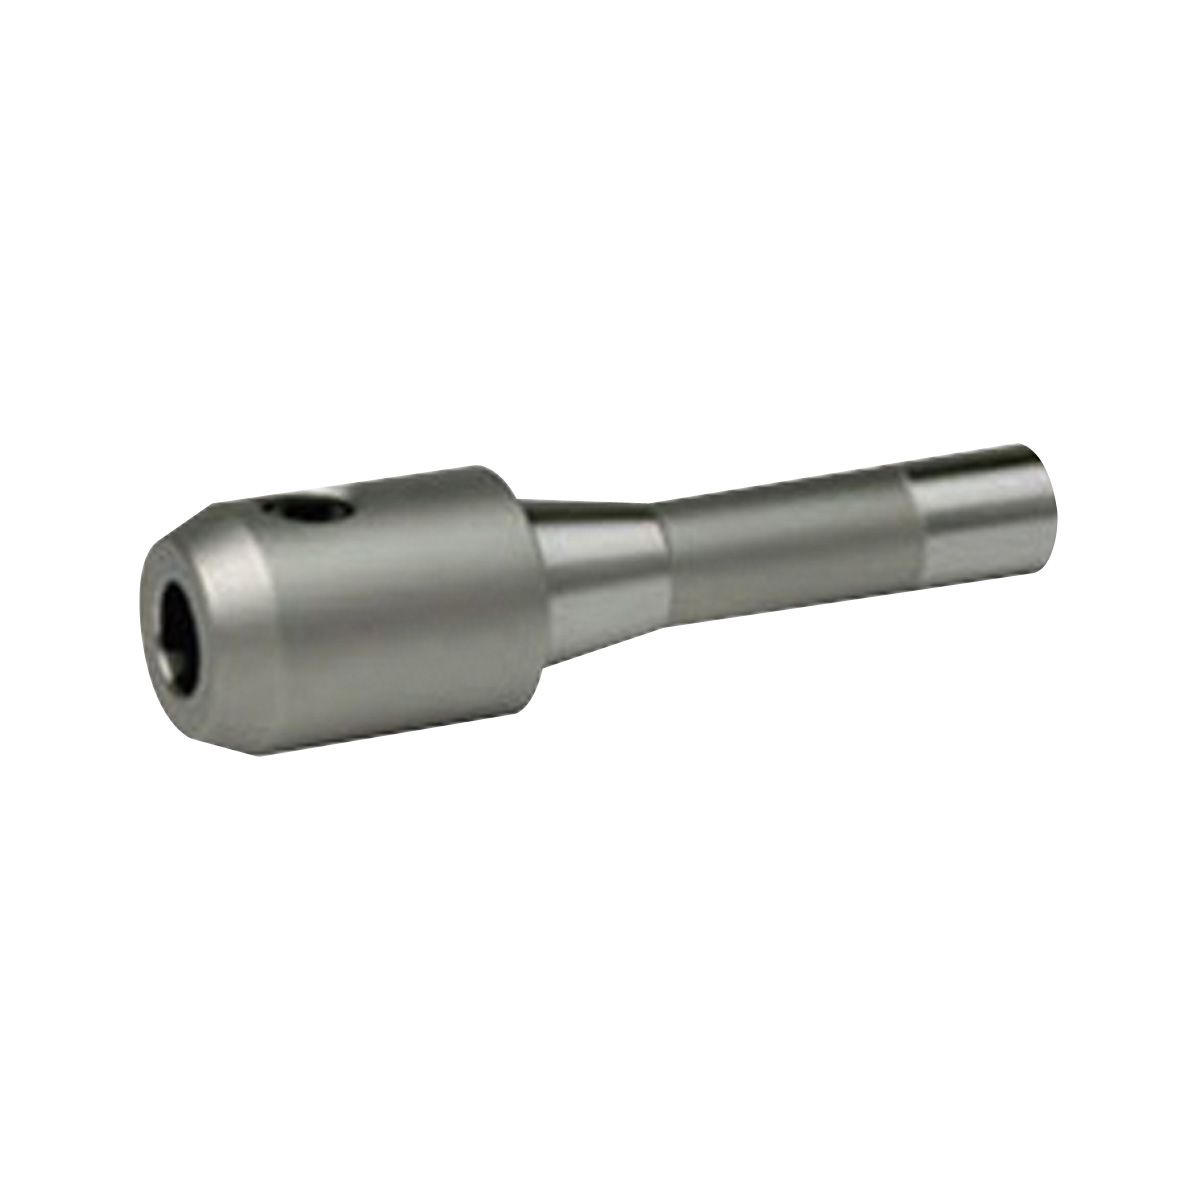 3/16" R8 END MILL HOLDER-PRO SERIES  (3901-0101)